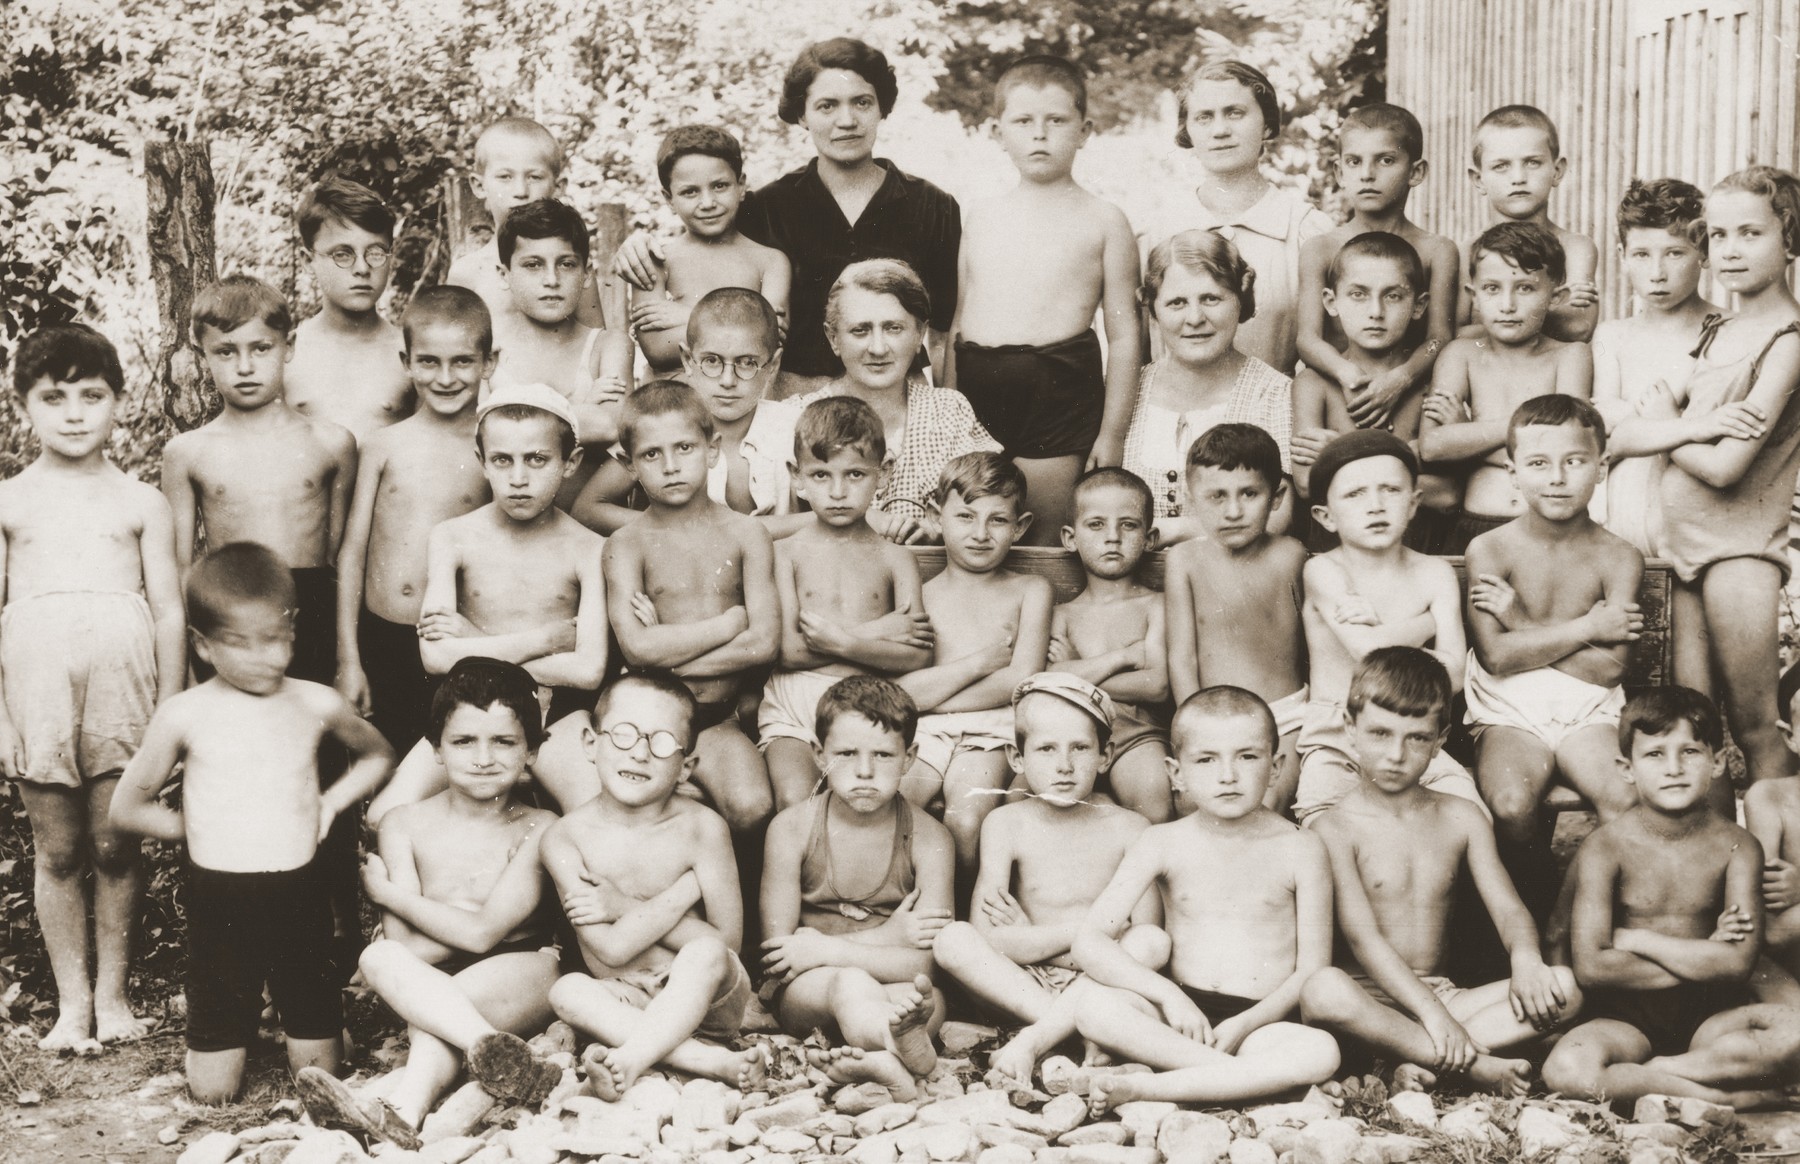 Group portrait of Jewish children at an OSE summer camp.   

Among those pictured are Anny (Hubner) Andermann (third row, fifth from the right); OSE pediatrician, Dr. Salter (next to Anny); and her son, Frederick Andermann (standing between the two women).